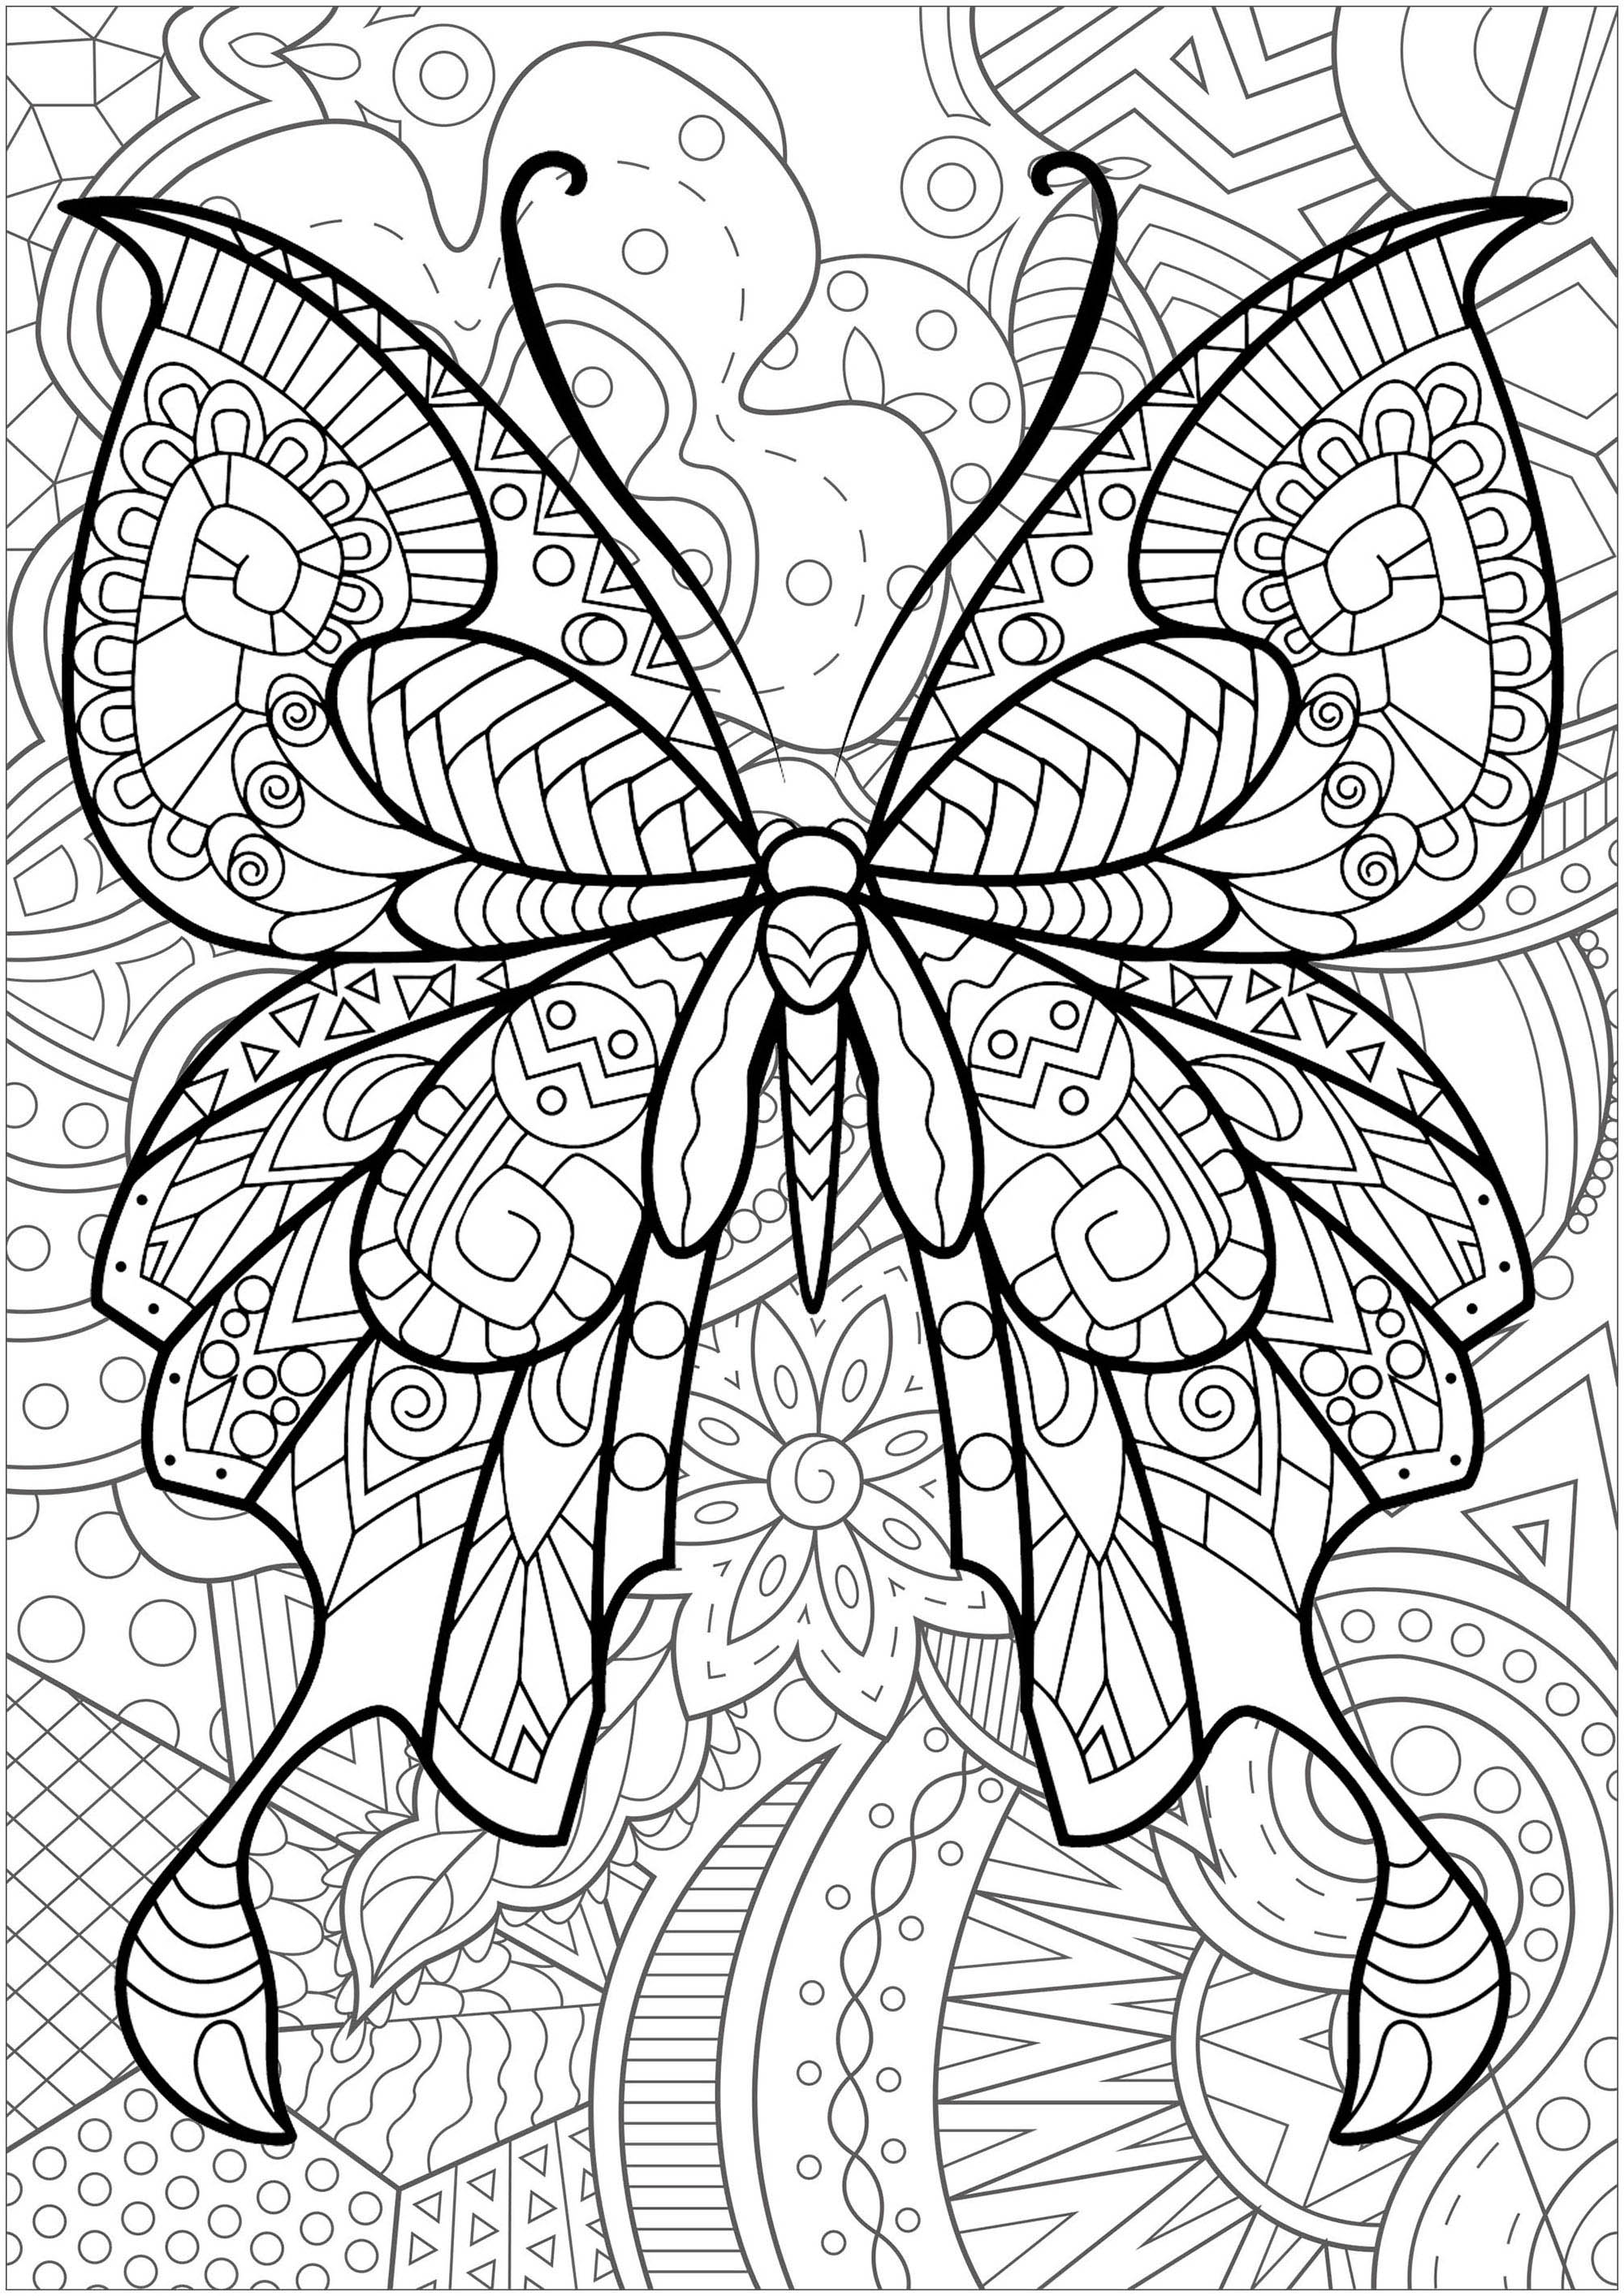 Butterfly with patterns inside and magnificent flowered background - 2, Artist : Art. Isabelle